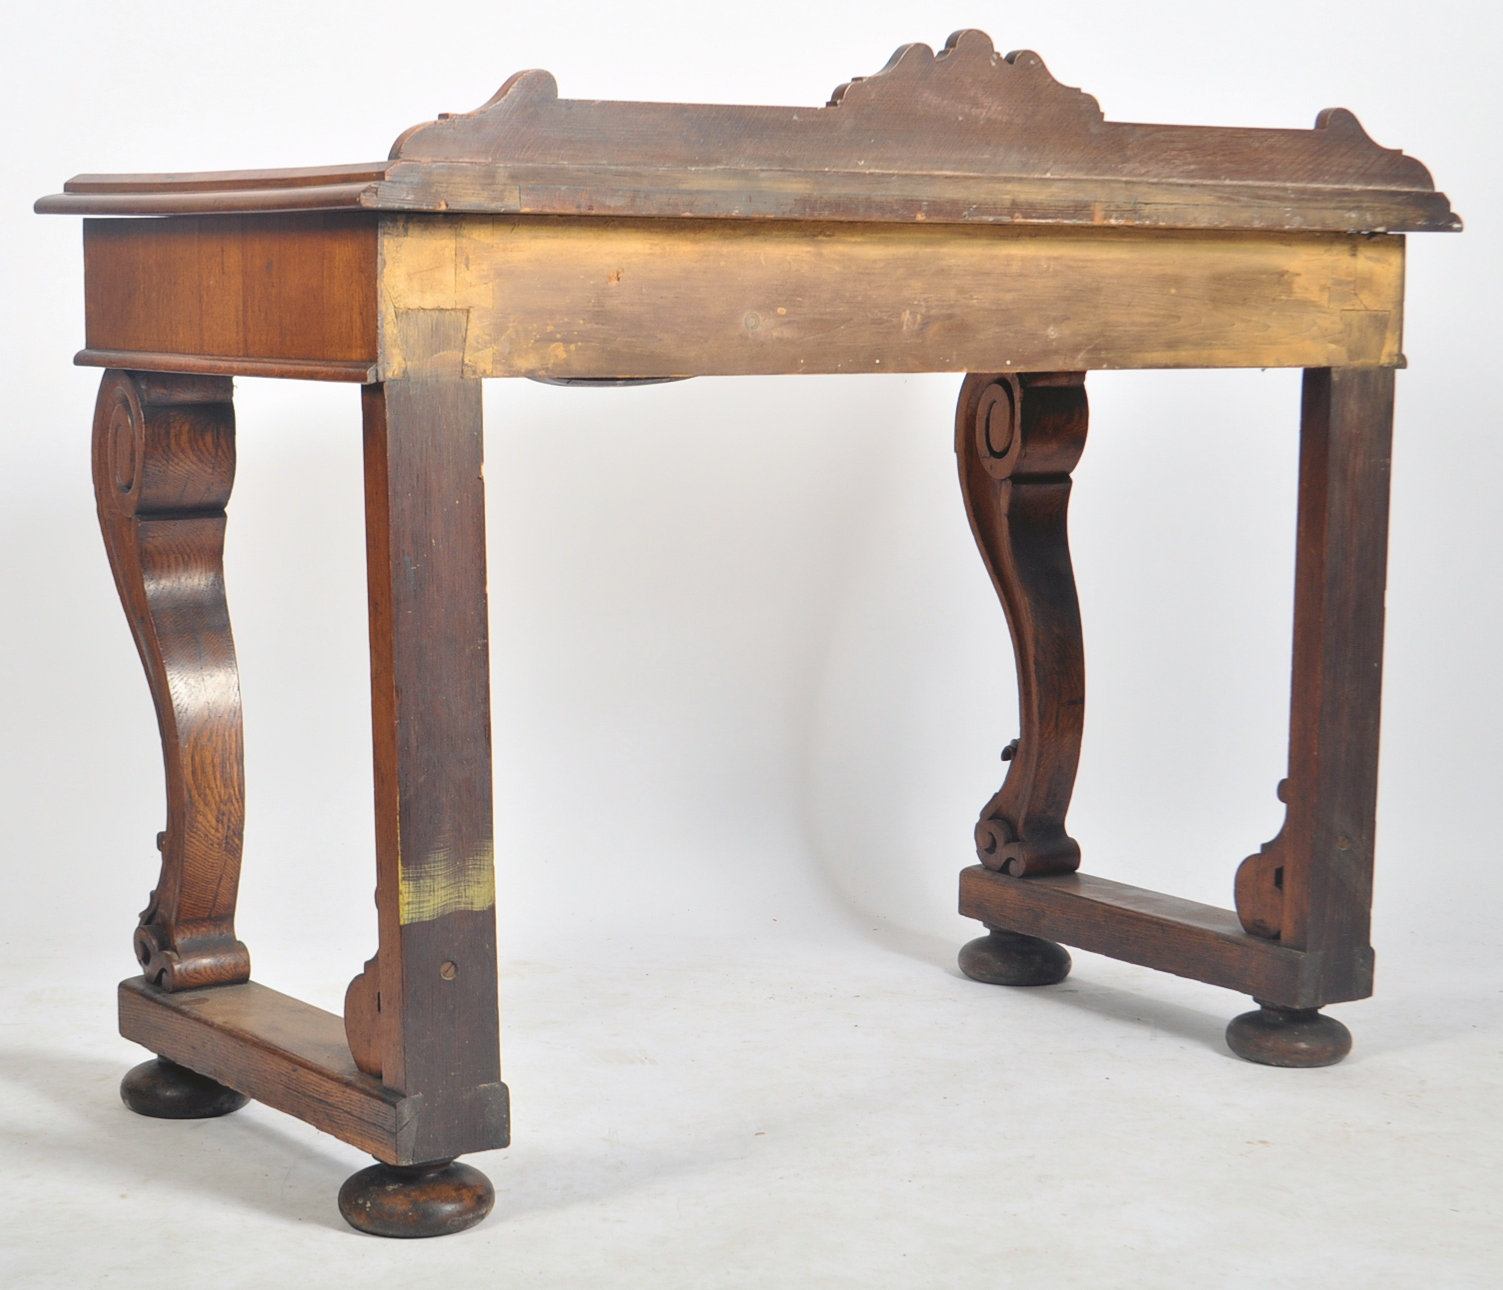 HIGH VICTORIAN 19TH CENTURY OAK SERPENTINE CONSOLE TABLE - Image 5 of 5